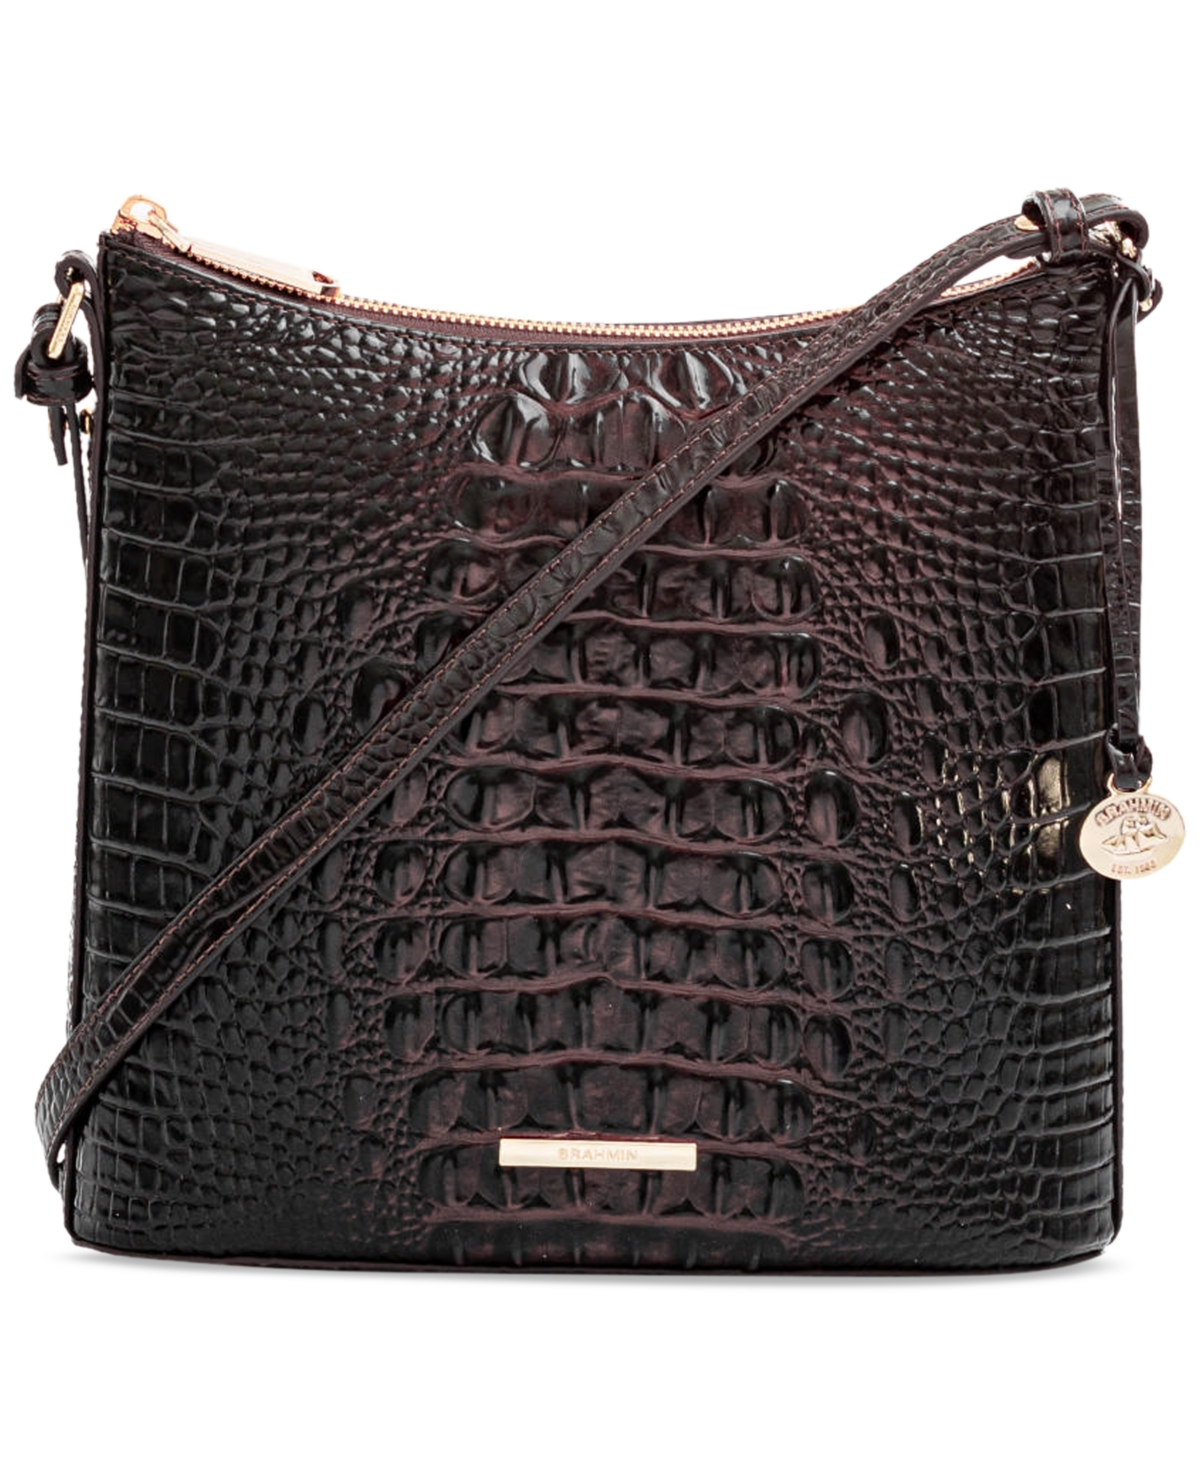 Katie Melbourne Embossed Leather Crossbody - Cocoa Ombre Melbourne